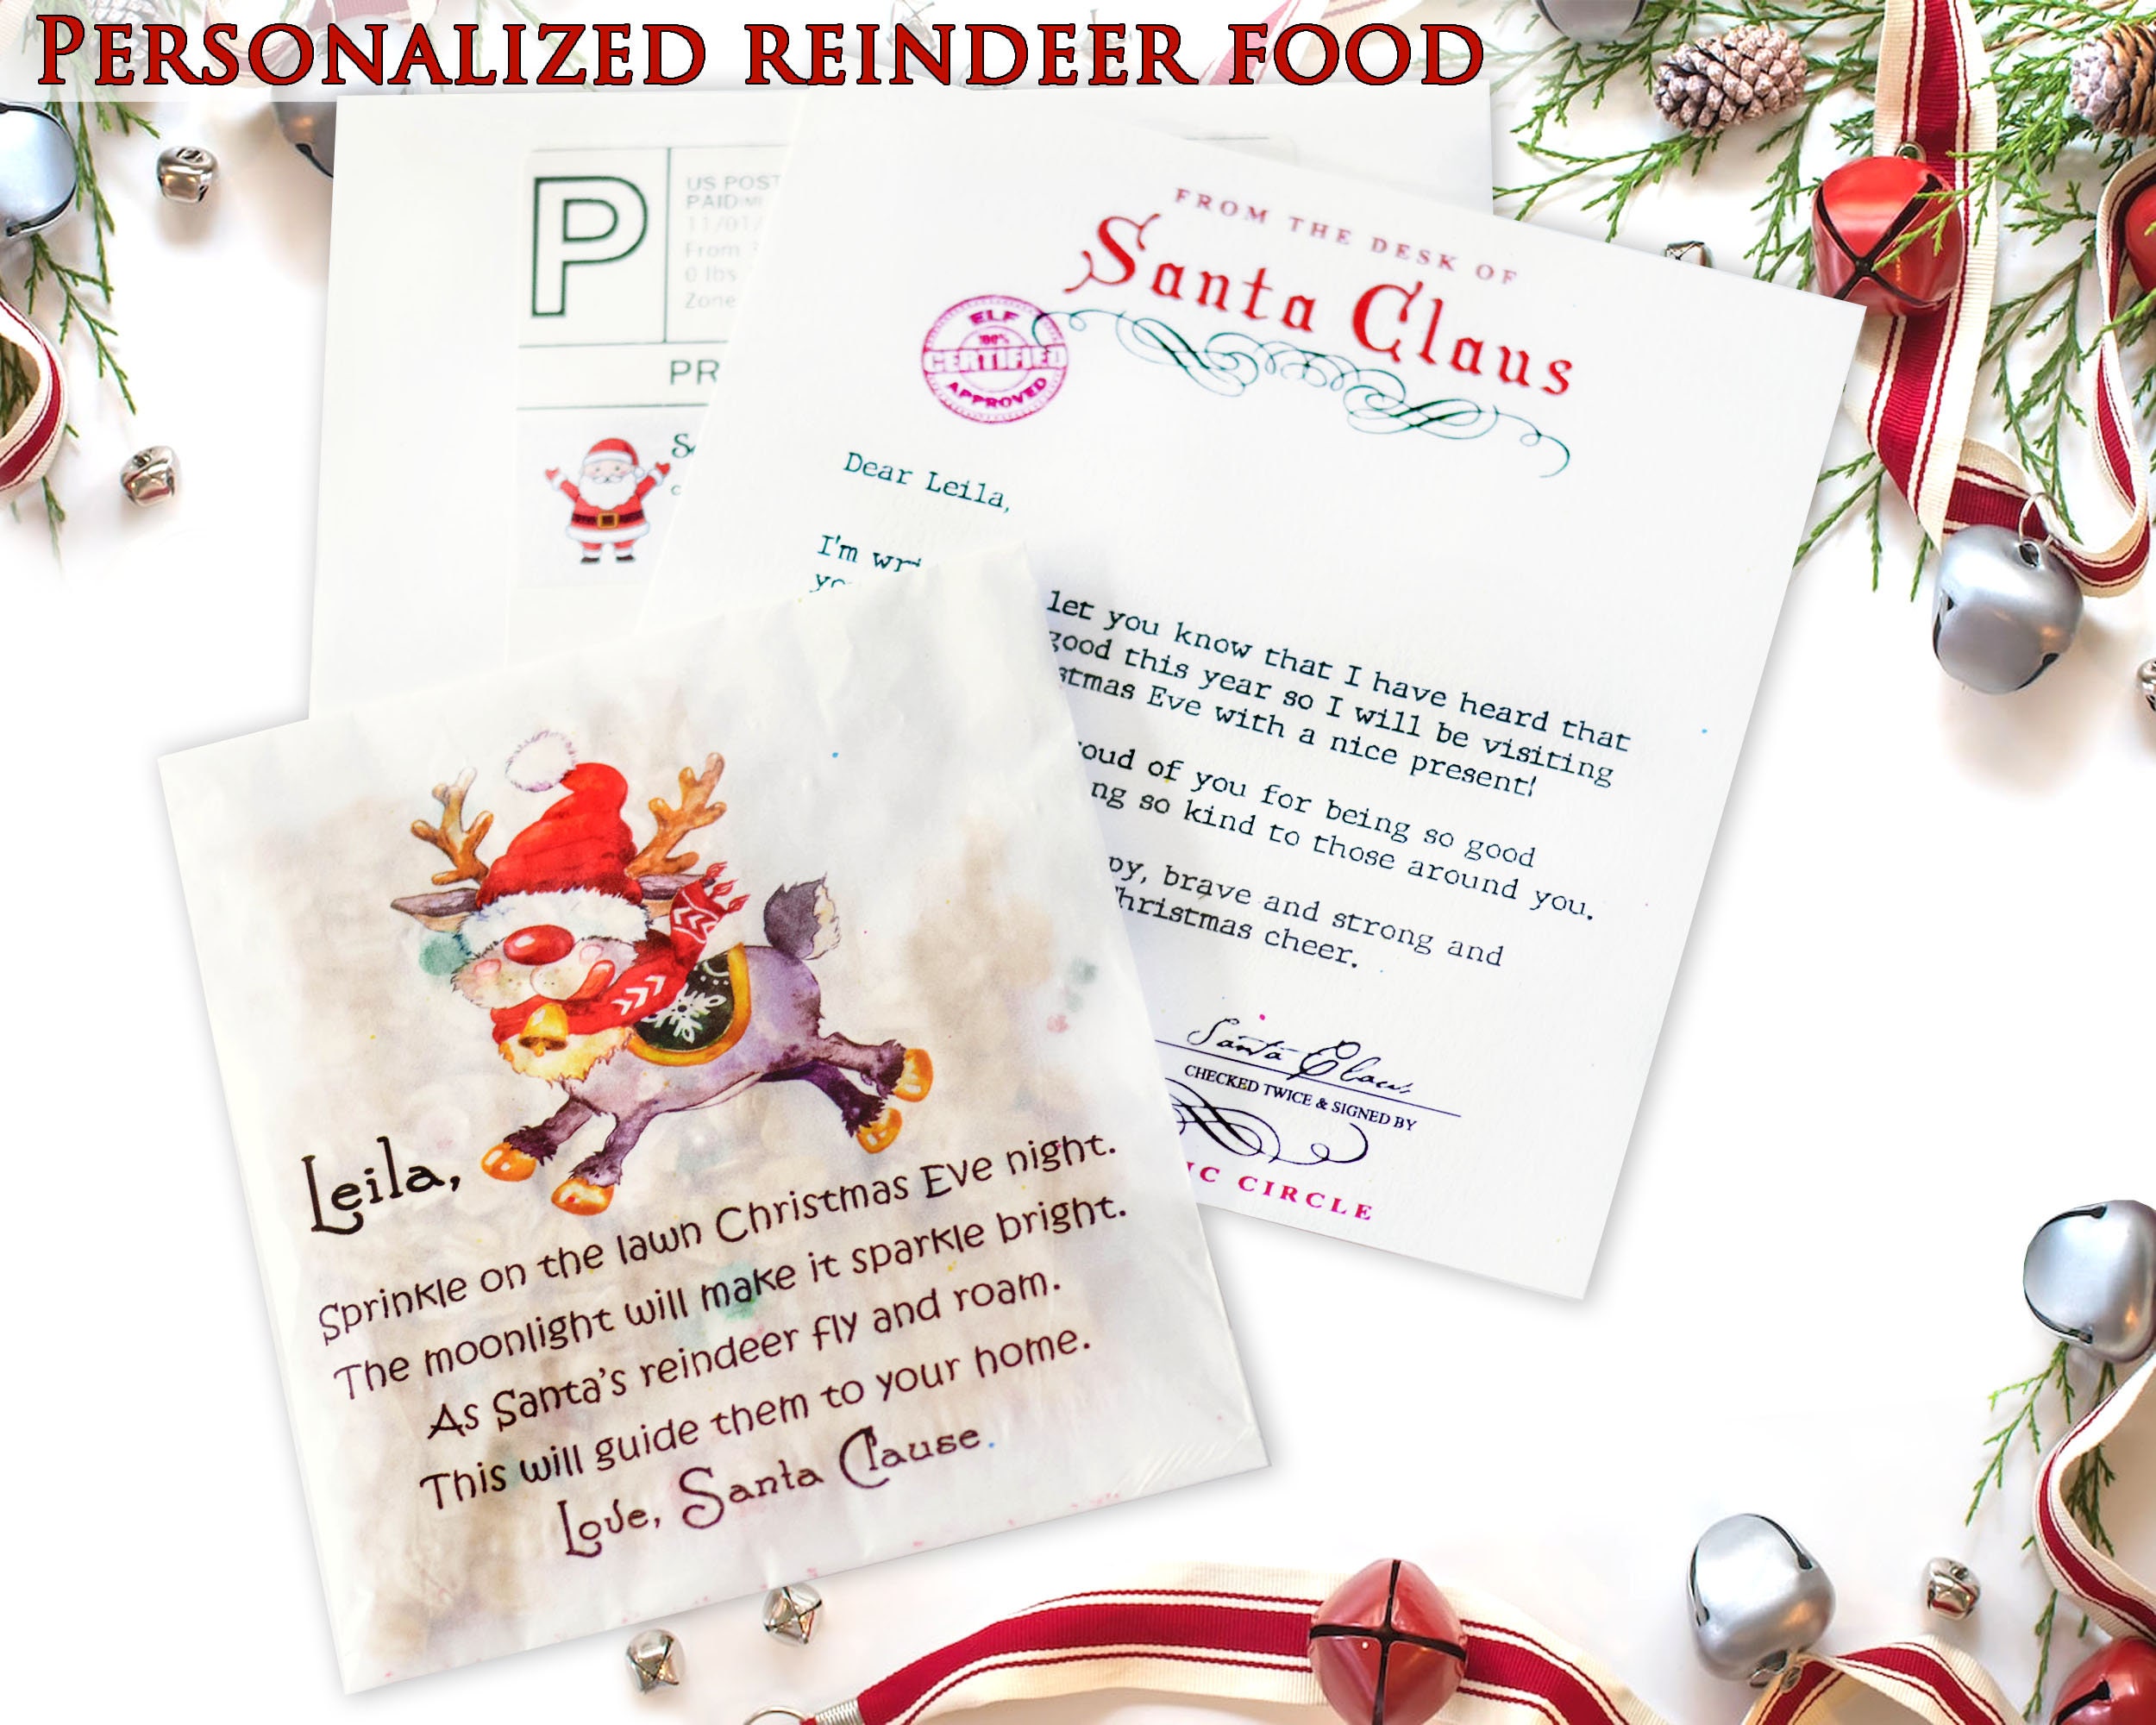 Letters To Santa Element Pack #1